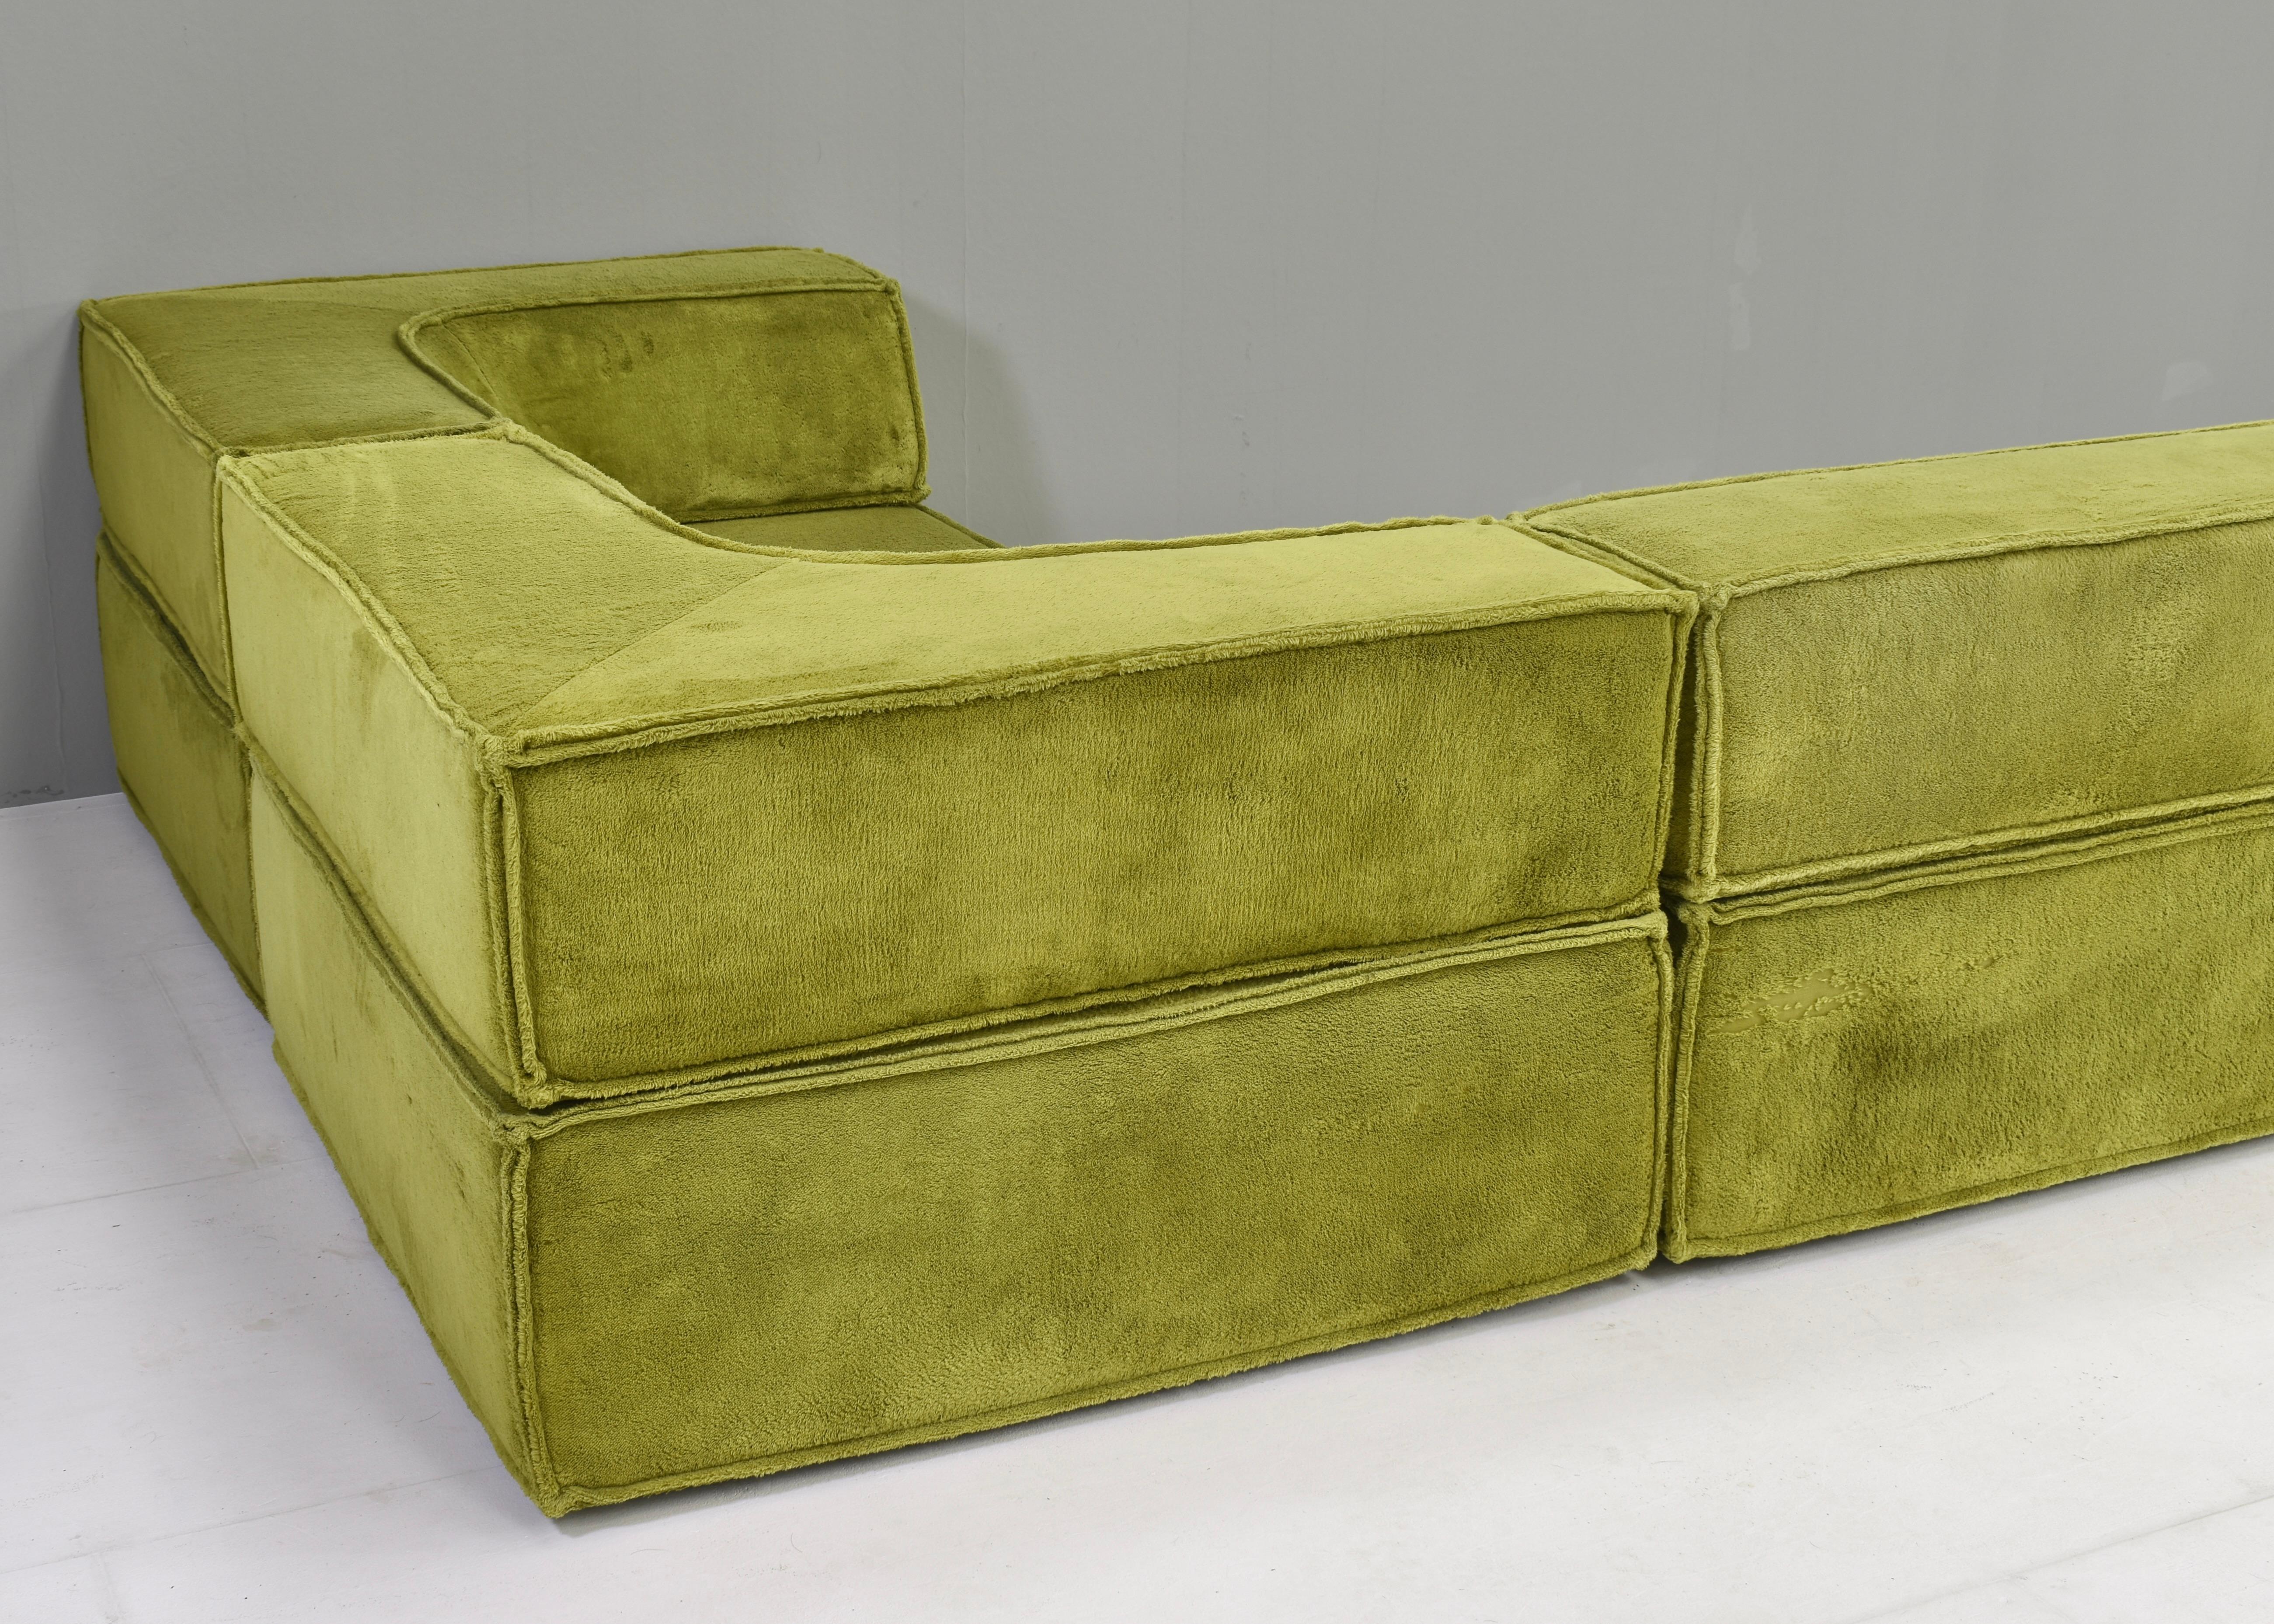 COR Trio Sectional Sofa by Team Form Ag for COR, Germany / Switzerland, 1972 5